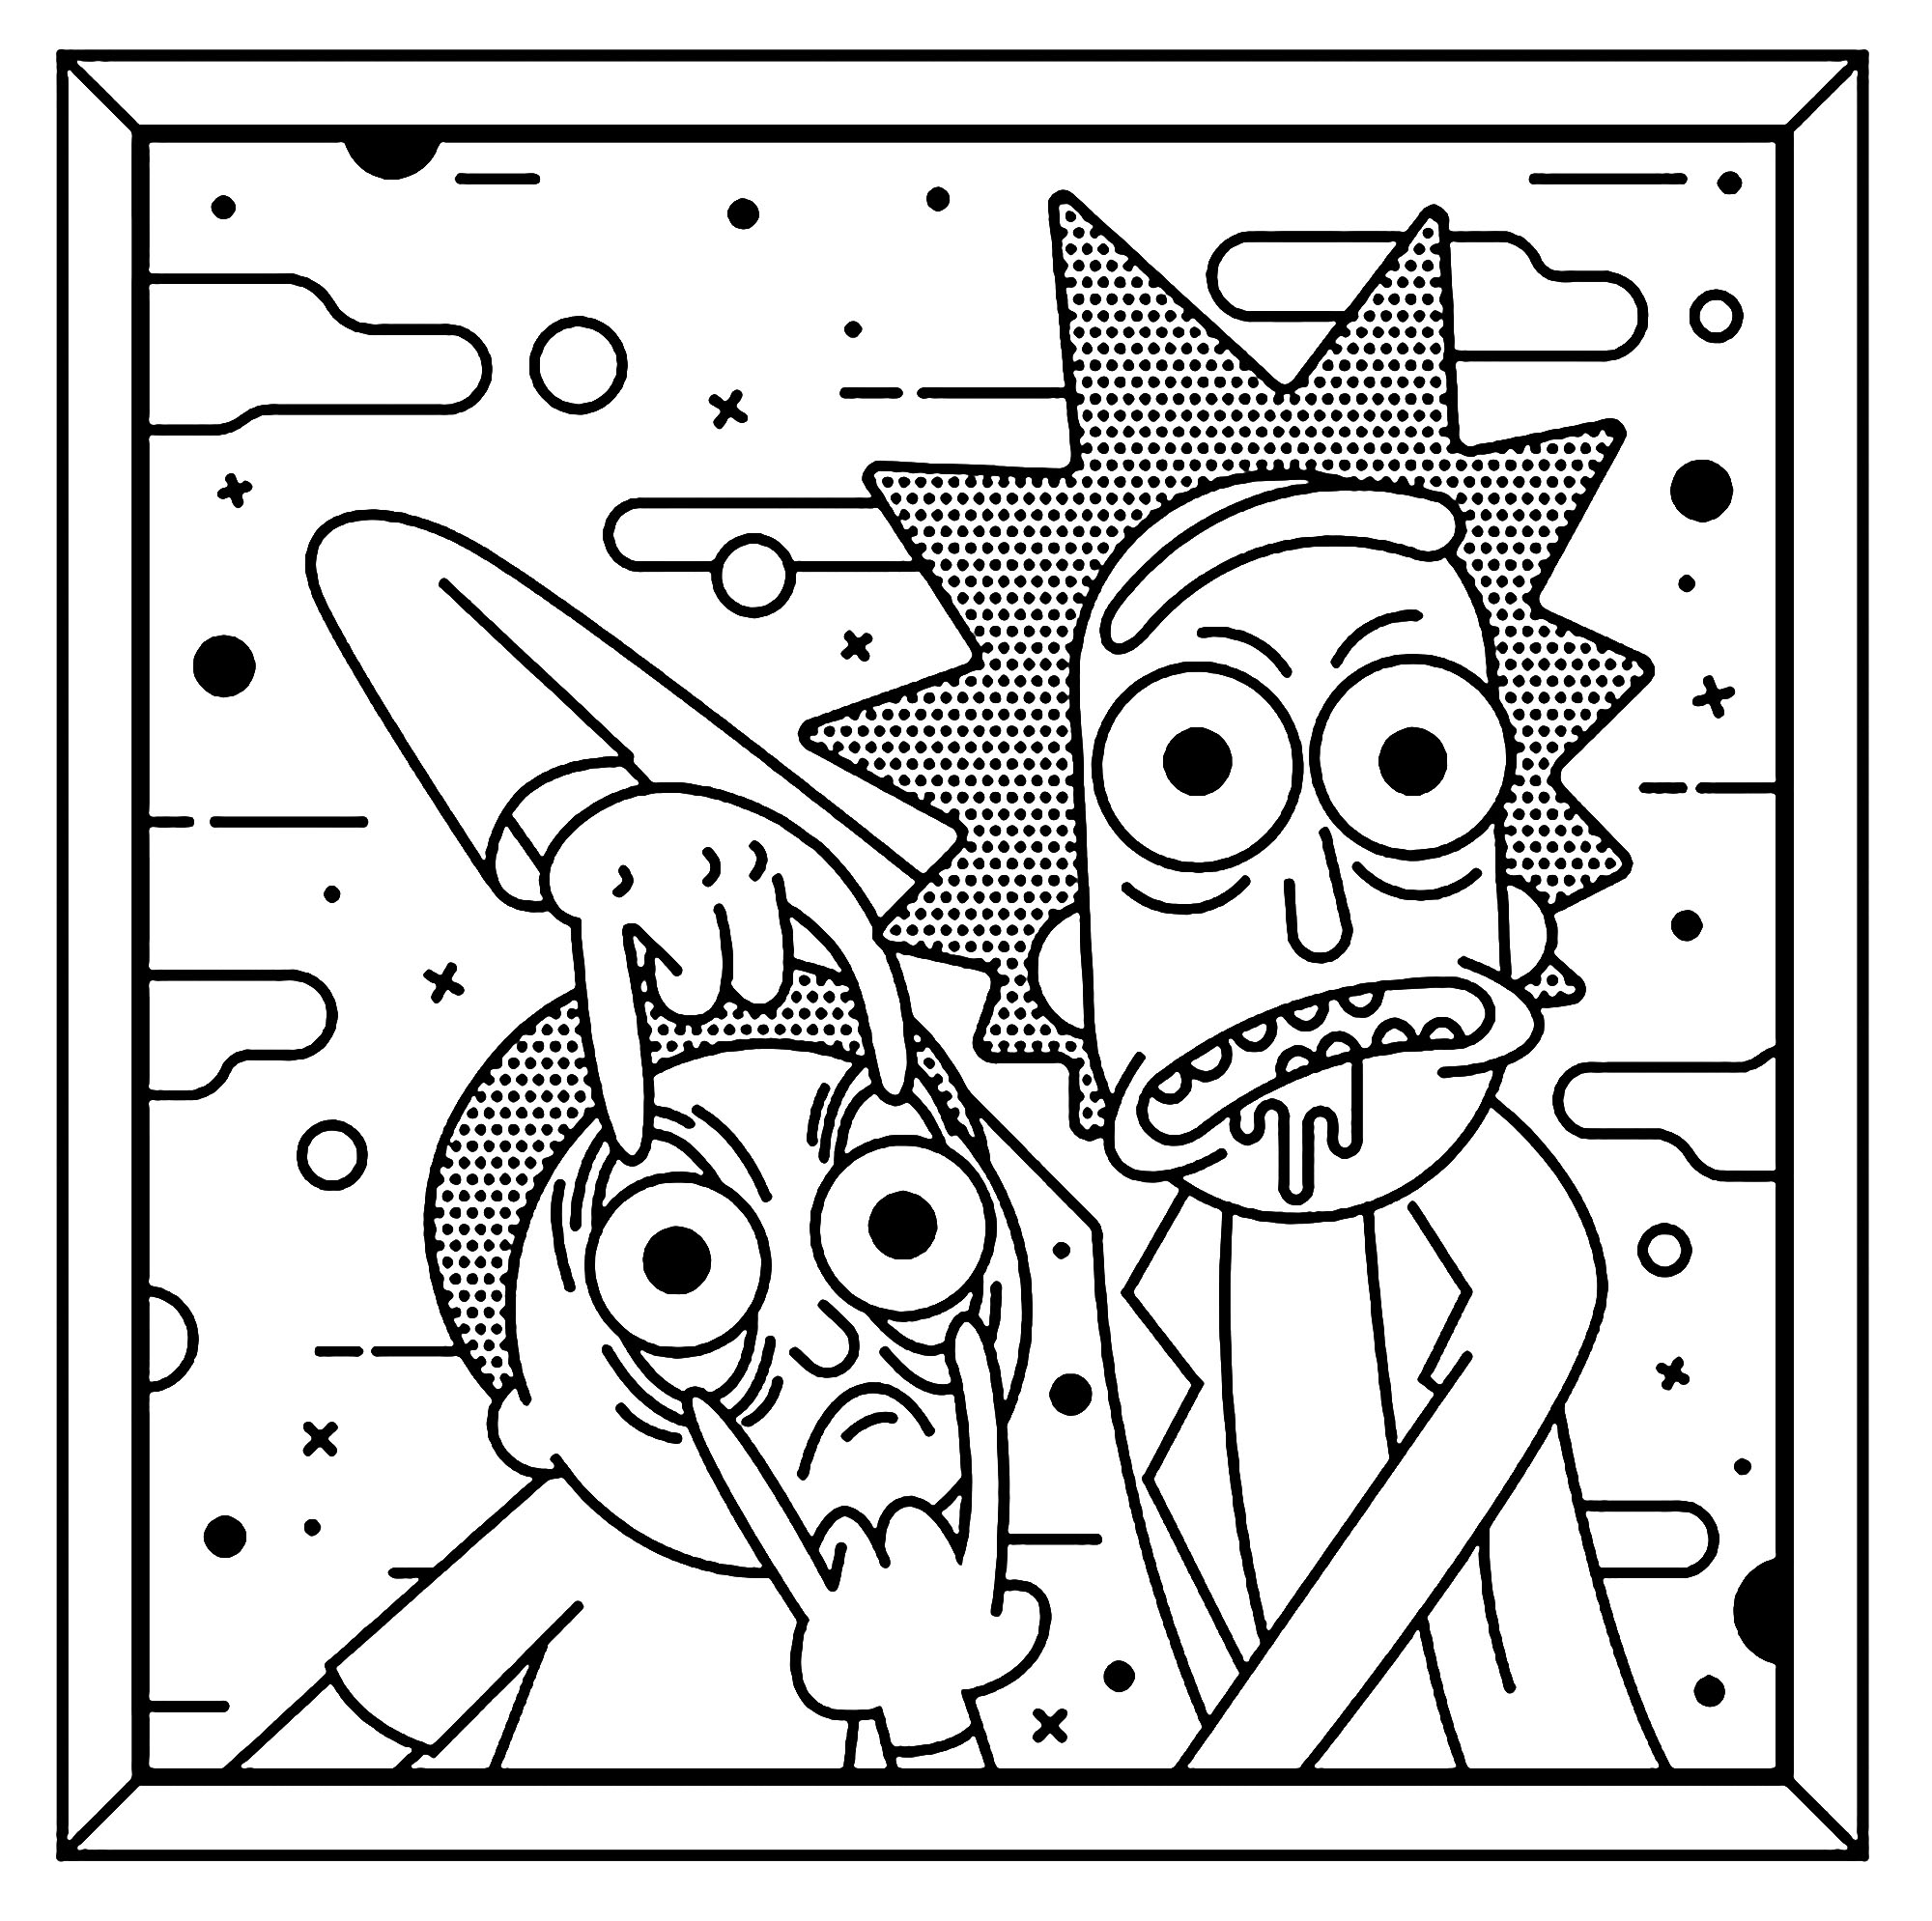 A drawing with Rick and Morty, in a very Pop Art's style. It looks like a true Roy Lichtenstein's painting.